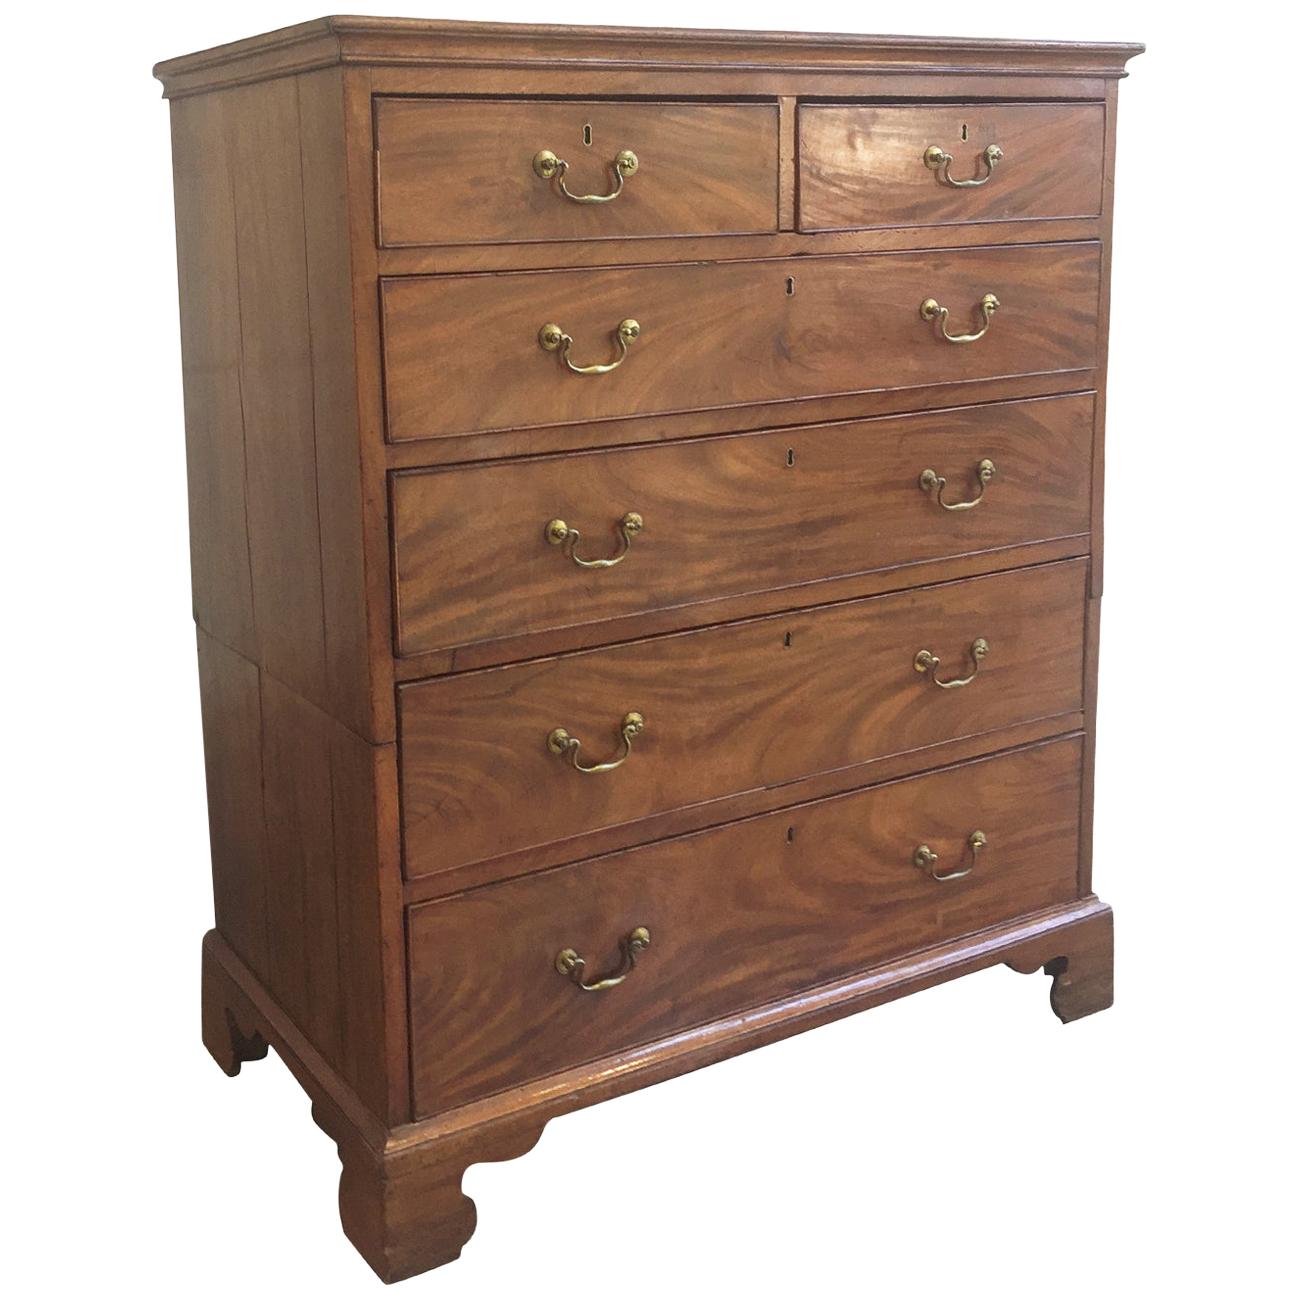 Late 18th Century Georgian Chest of Drawers